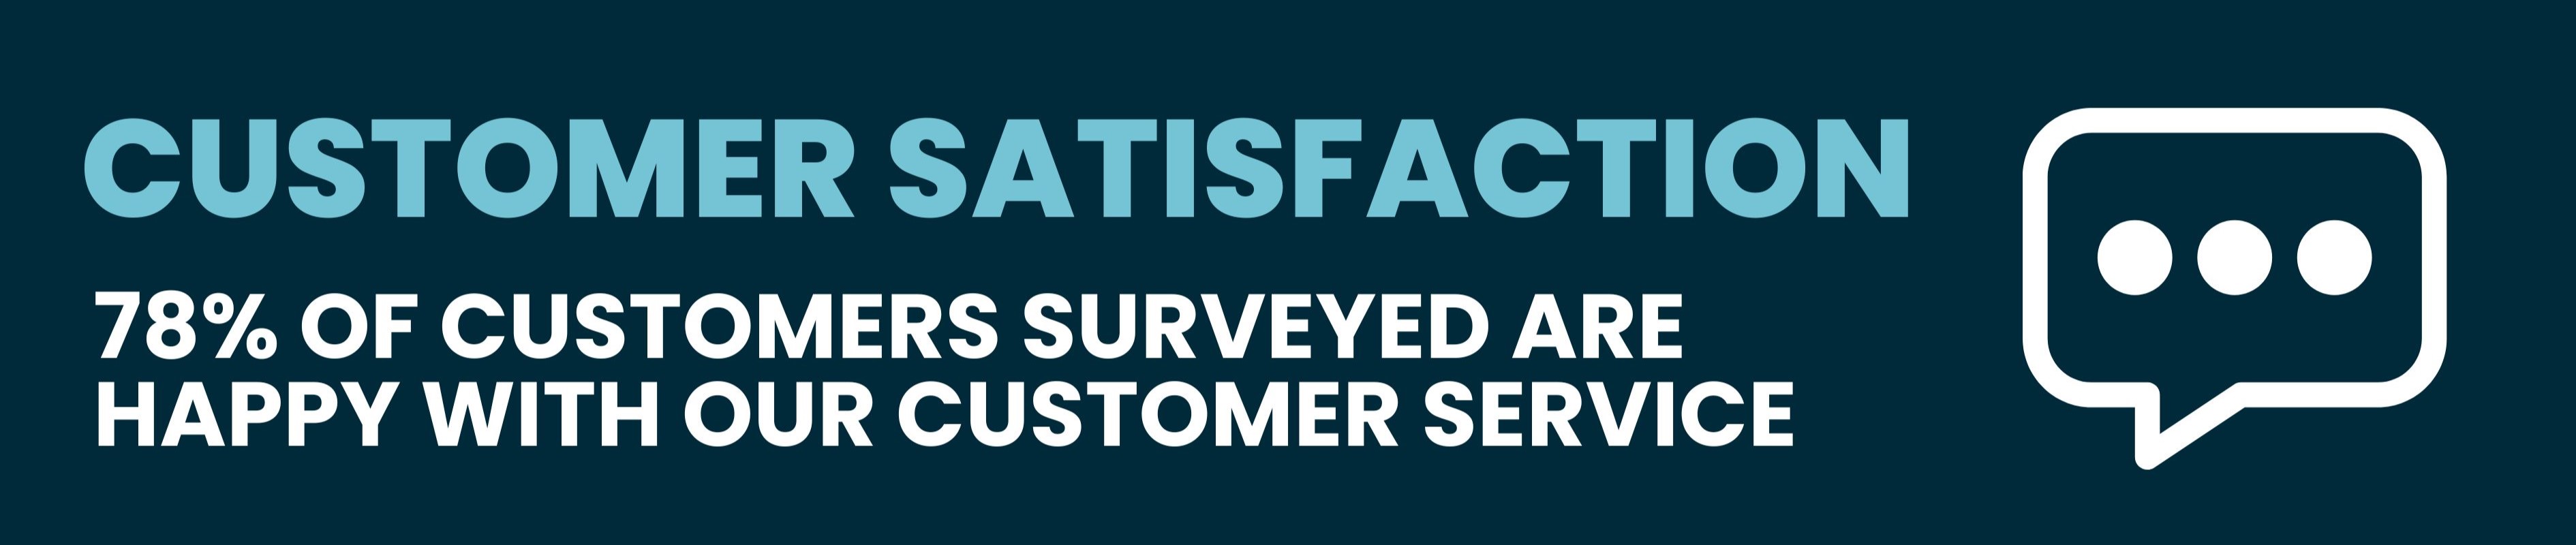 Customer satisfaction - 78% of customers surveyed are happy with our service